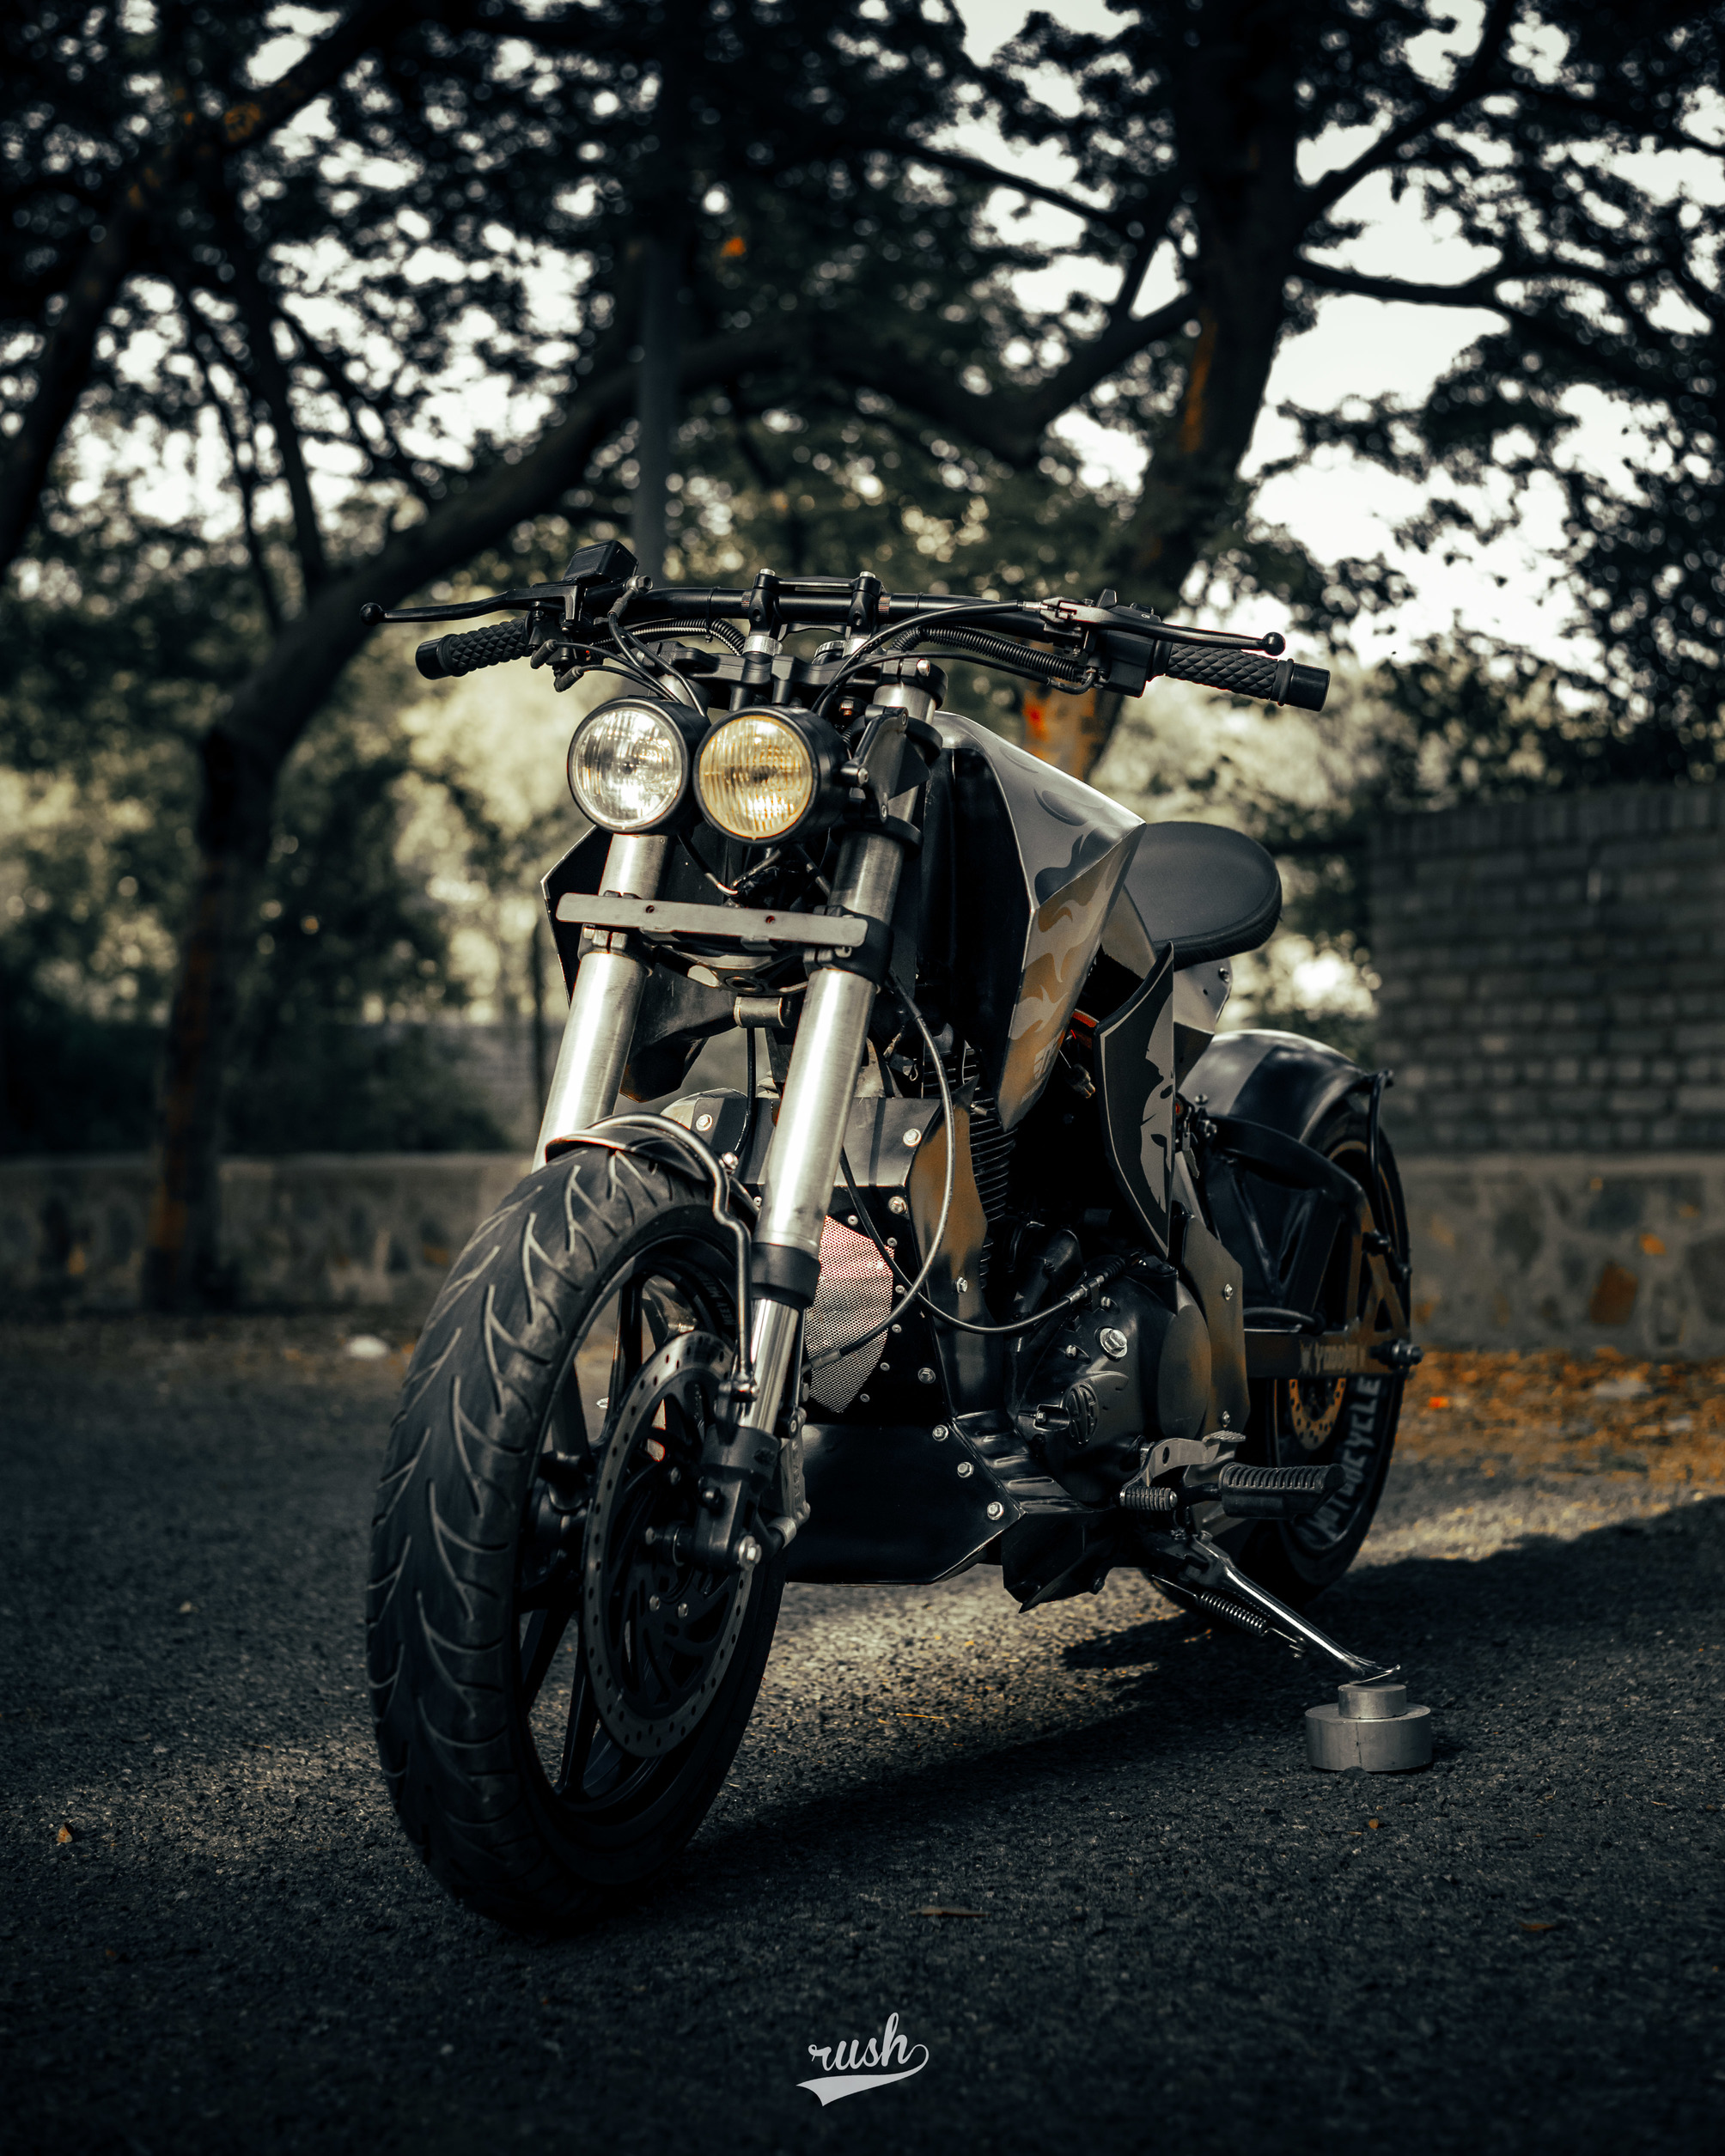 Meet 500cc Royal Enfield Yoddha Naked Streetfighter by Neev Motorcycles - pic